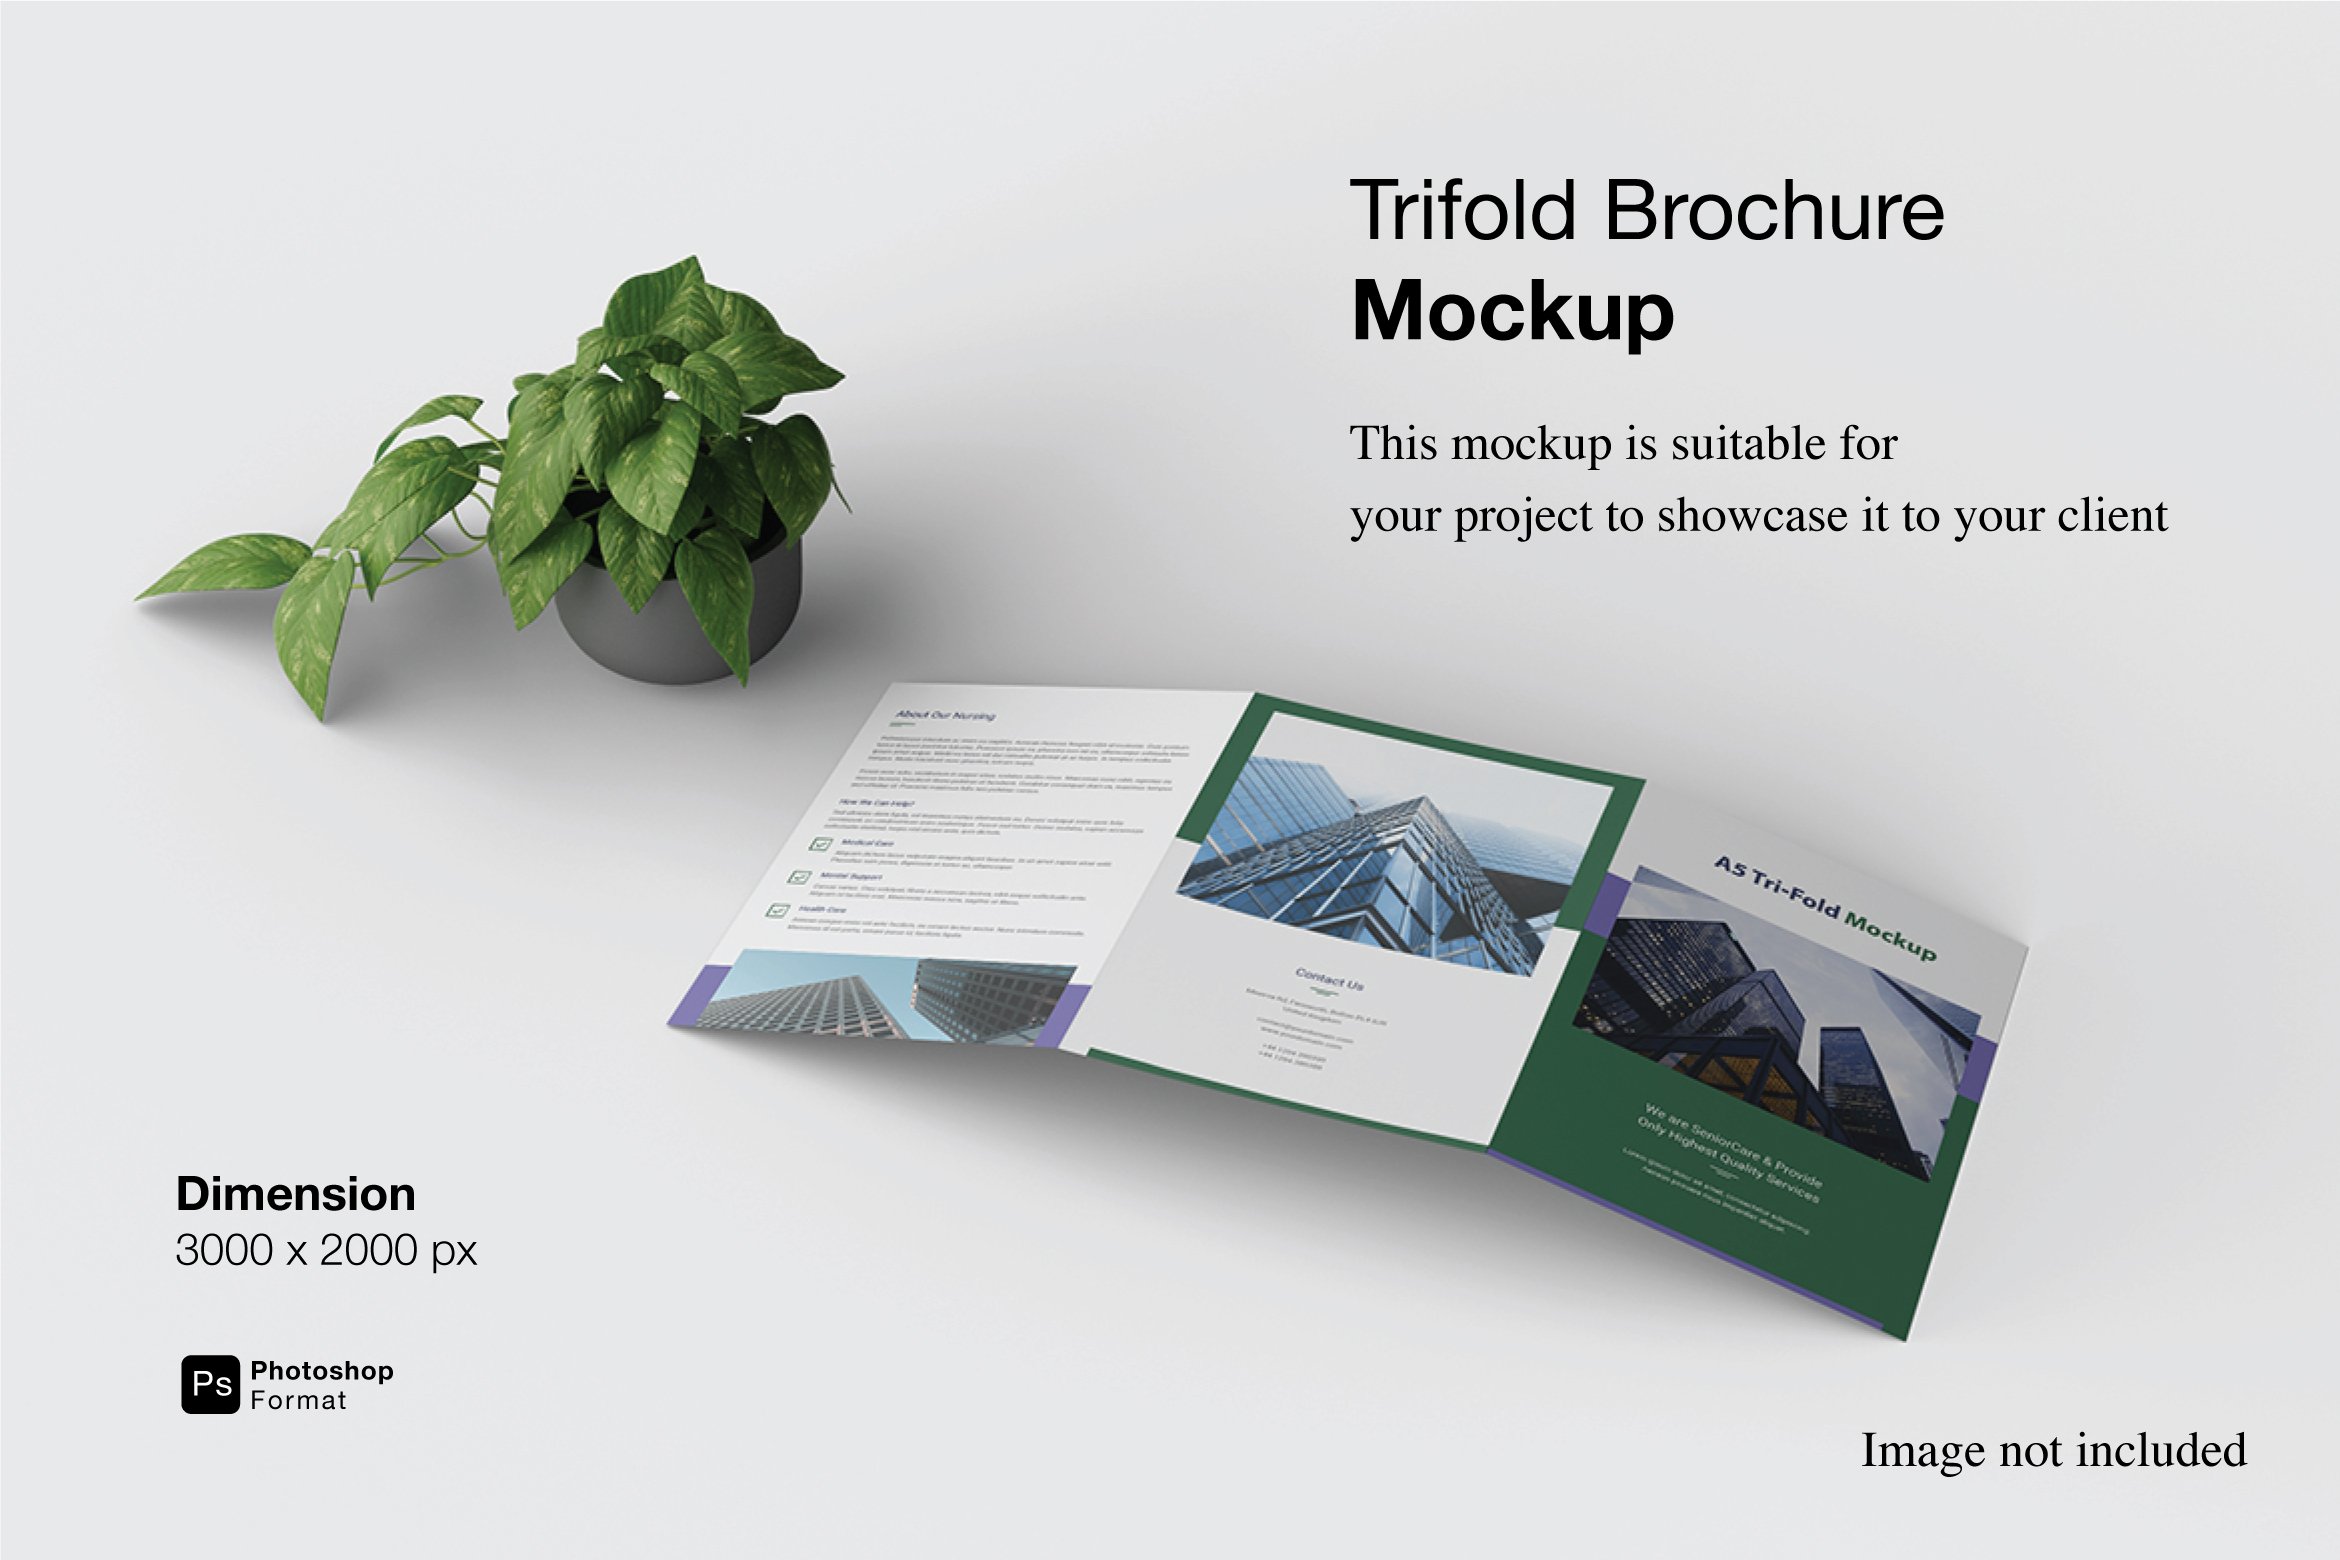 Trifold Brochure Mockup cover image.